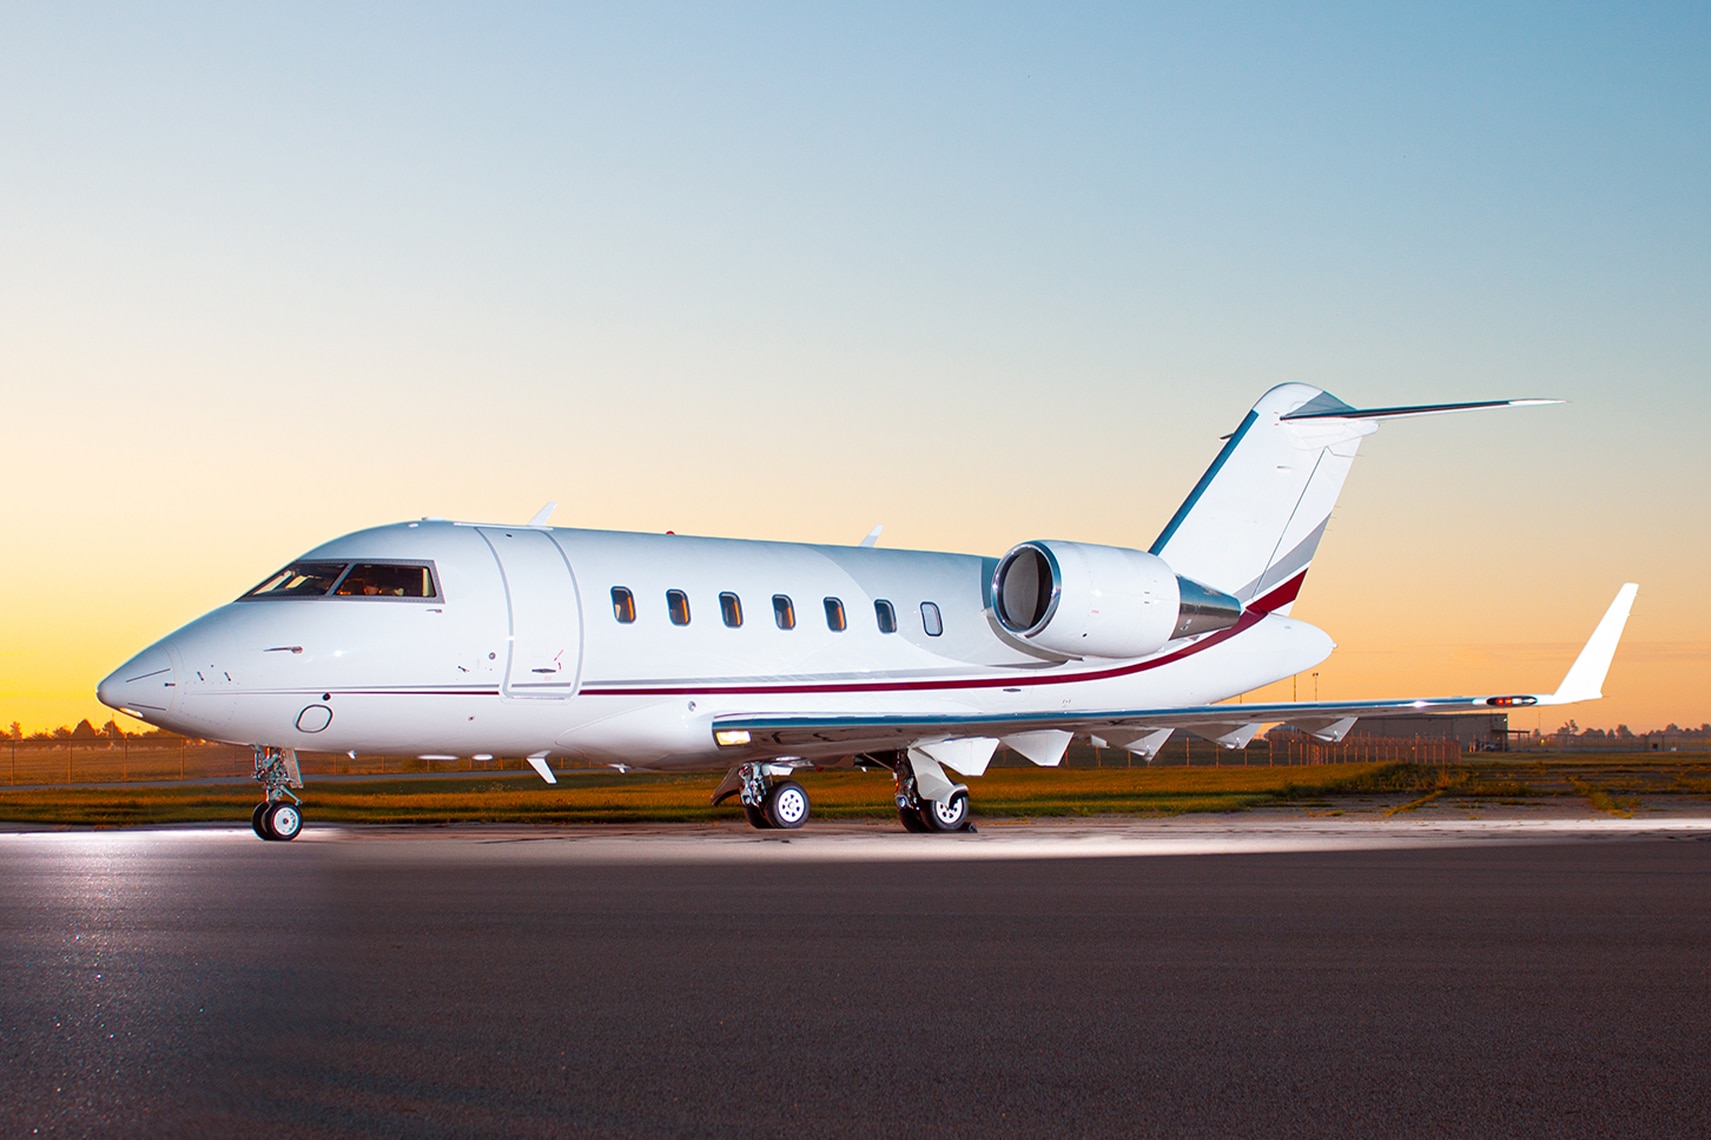 Challenger 650 Serial Number 6090 For Sale by Leviate Jet Sales. Pre-owned Inventory Private Aircraft for Sale